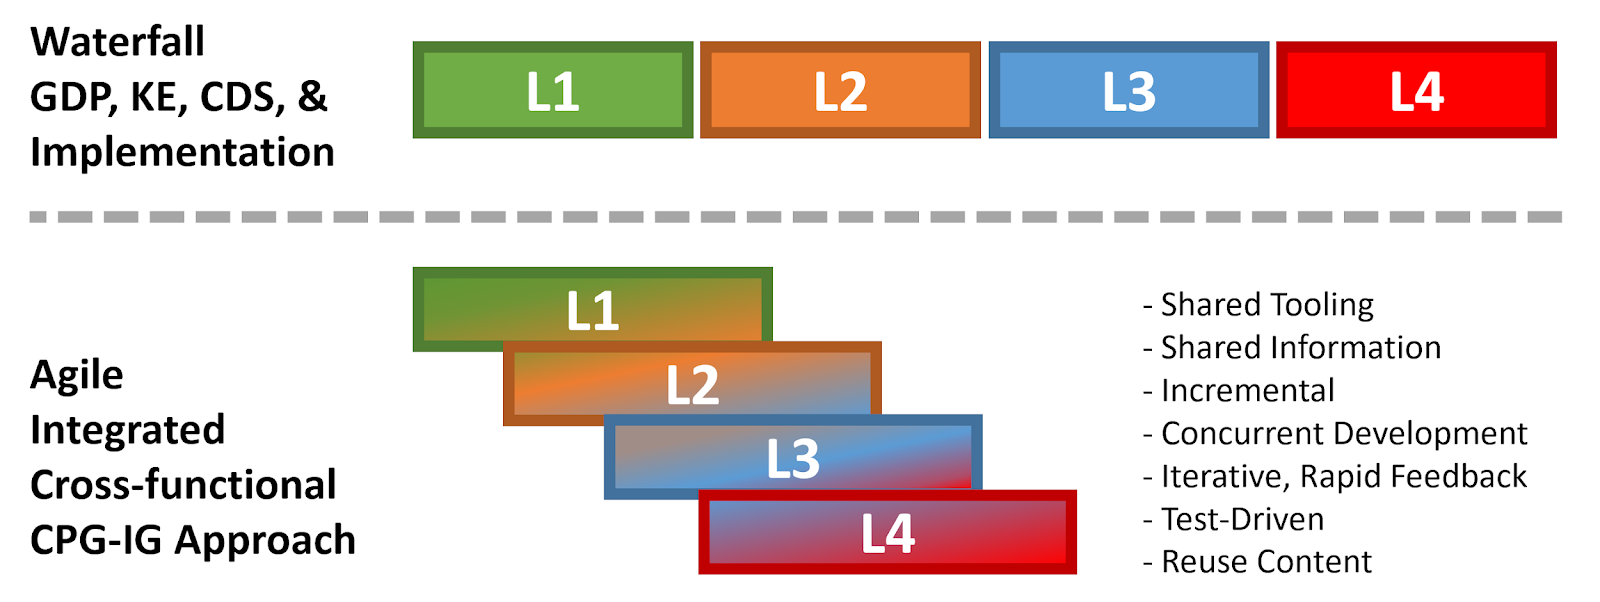 Levels adapted for Agile